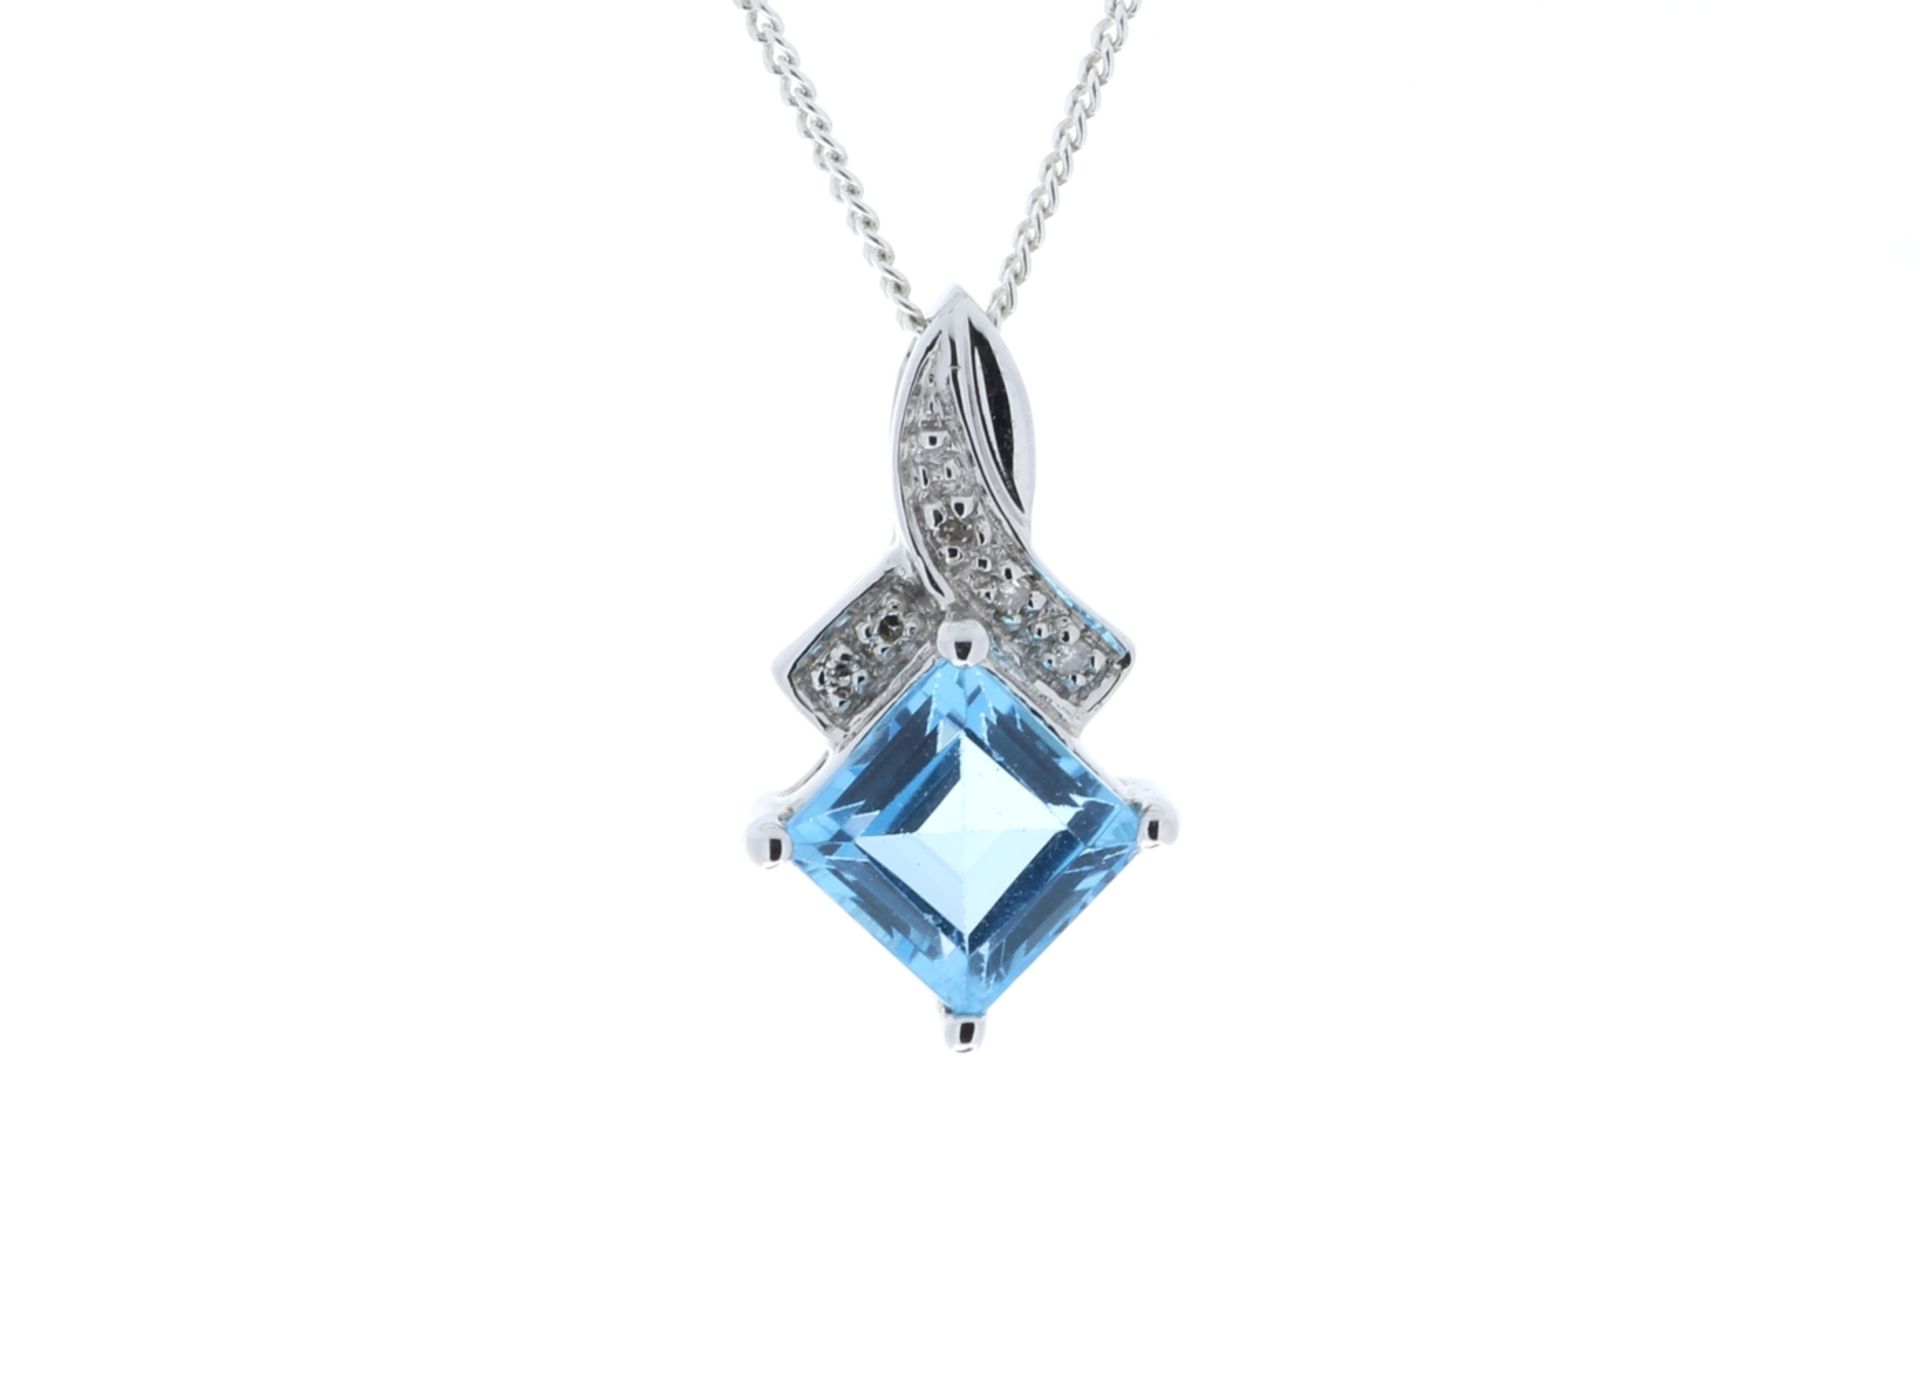 9ct White Gold Diamond And Blue Topaz Pendant 0.02 Carats - Valued by GIE £460.00 - 9ct White Gold